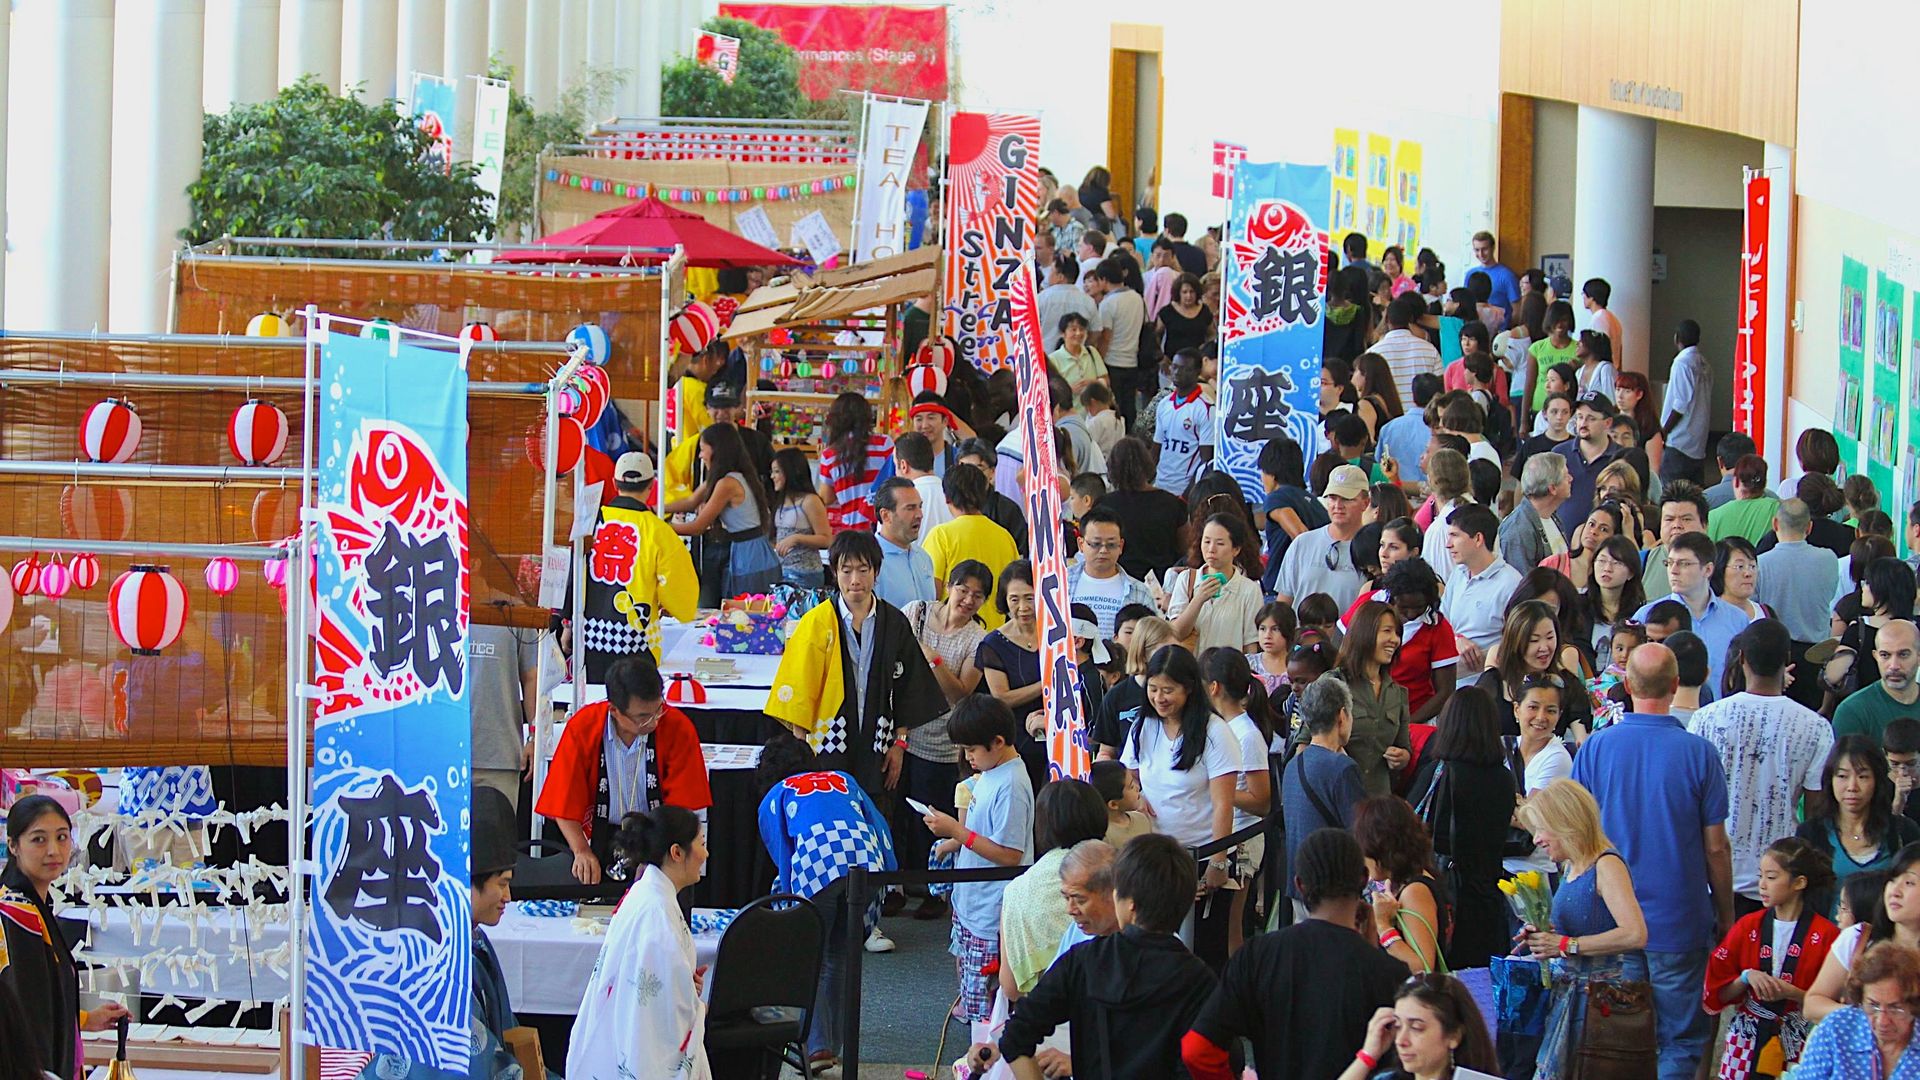 A photo of a large crowded convention center hallway with Japanese signs